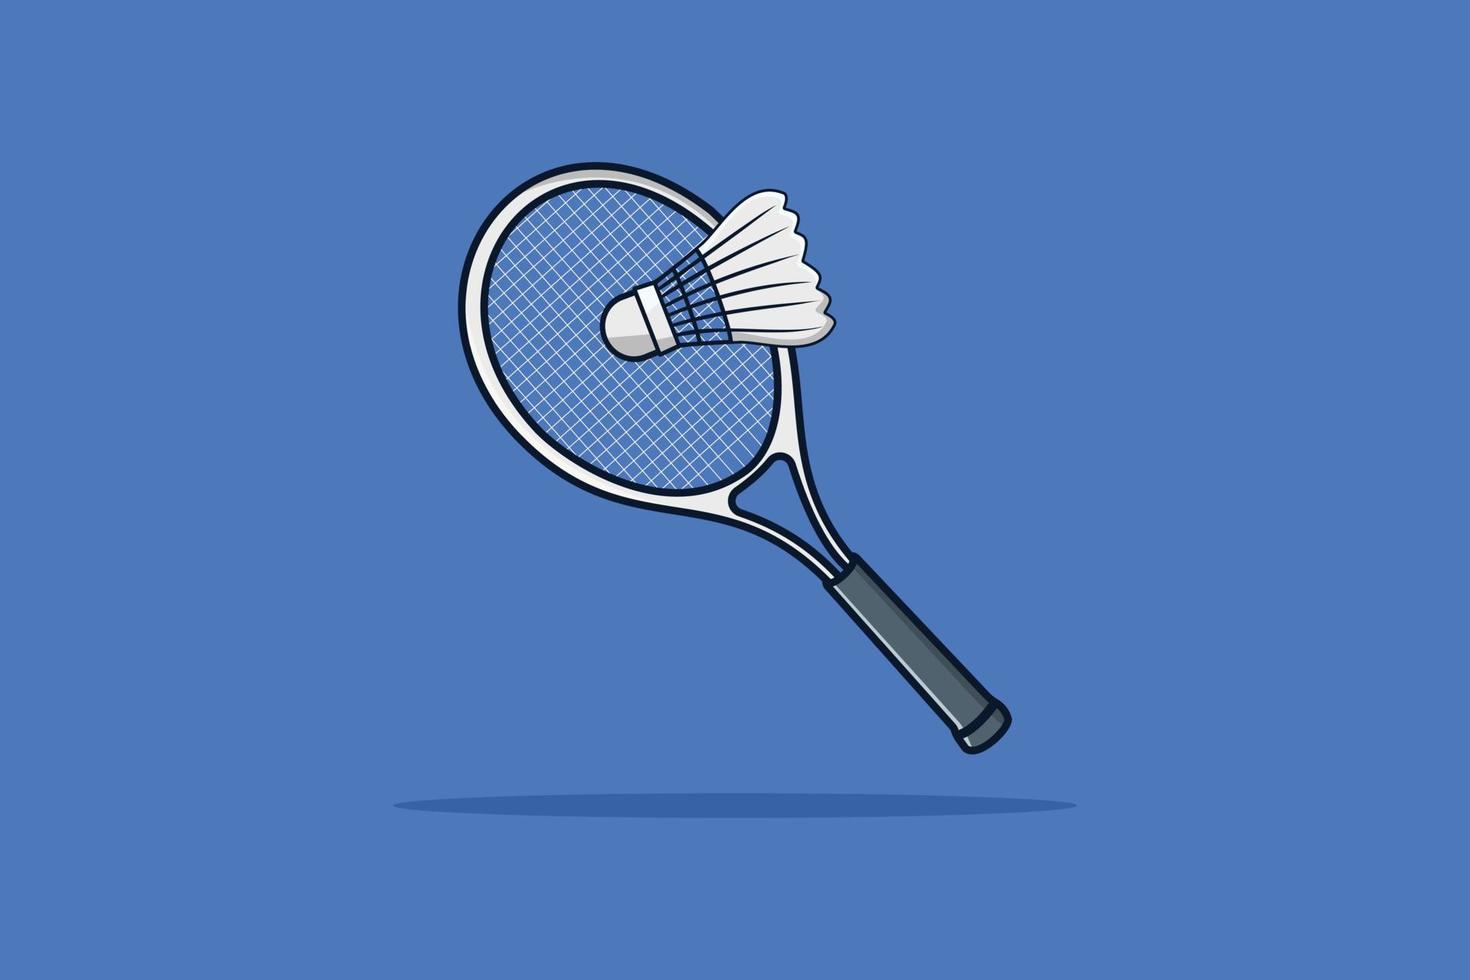 Badminton with Racket vector icon illustration. Sport object icon design concept, Sports life, Life style, Fitness game, Body warm, Sports game, Game competition, Badminton game.